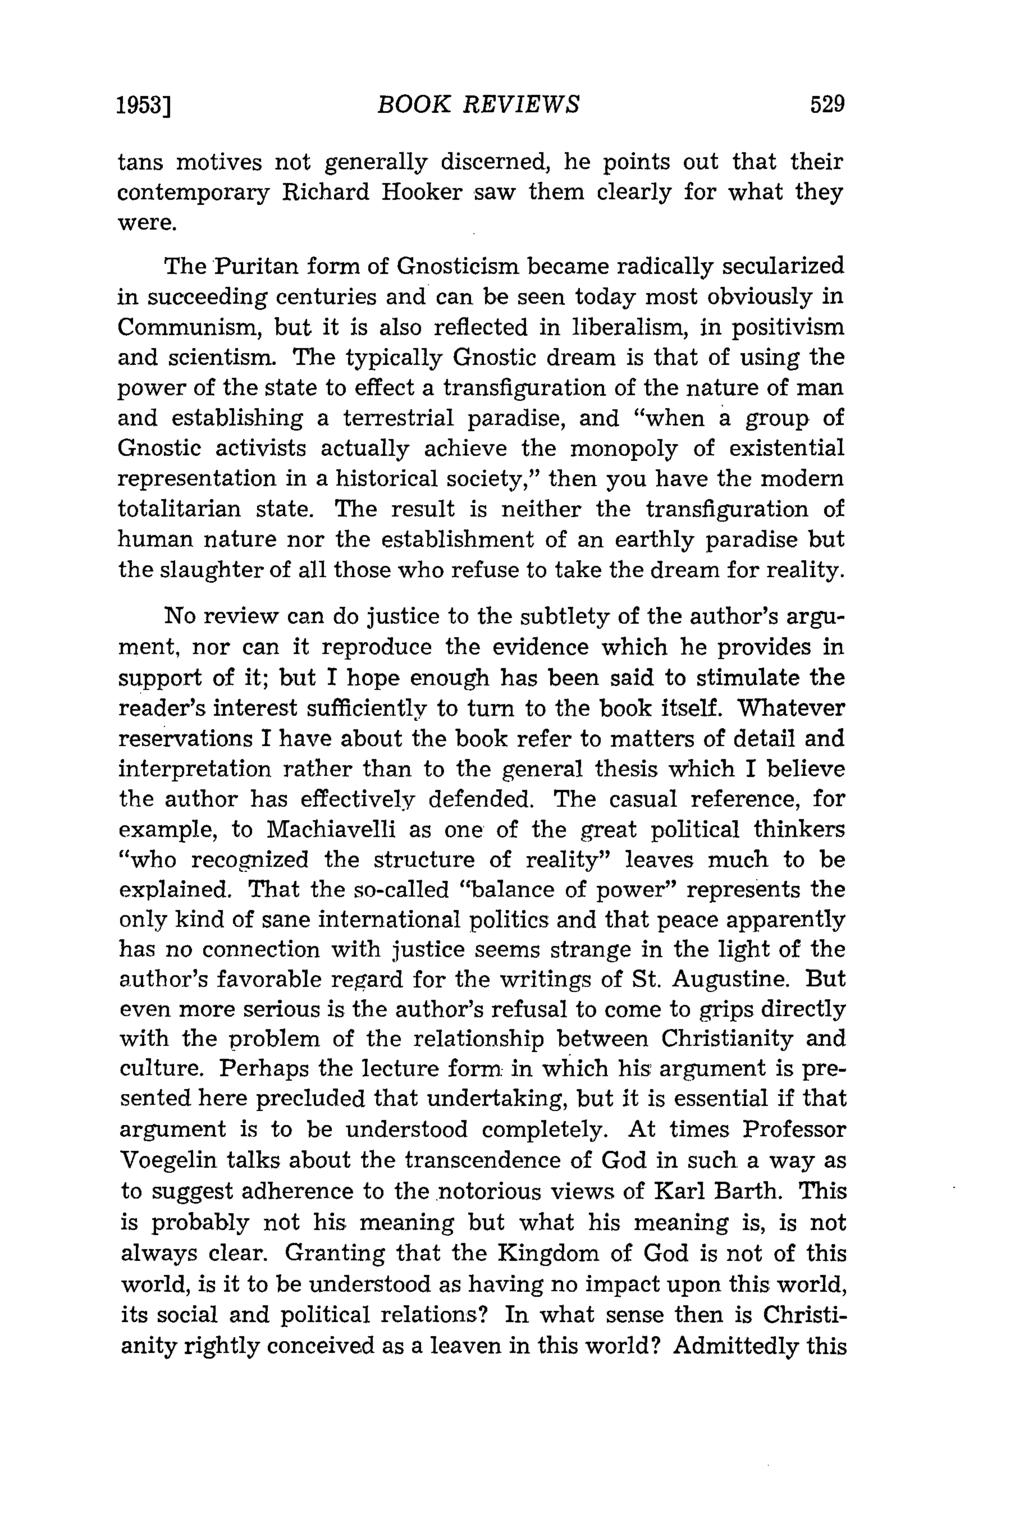 1953] BOOK REVIEWS tans motives not generally discerned, he points out that their contemporary Richard Hooker saw them clearly for what they were.